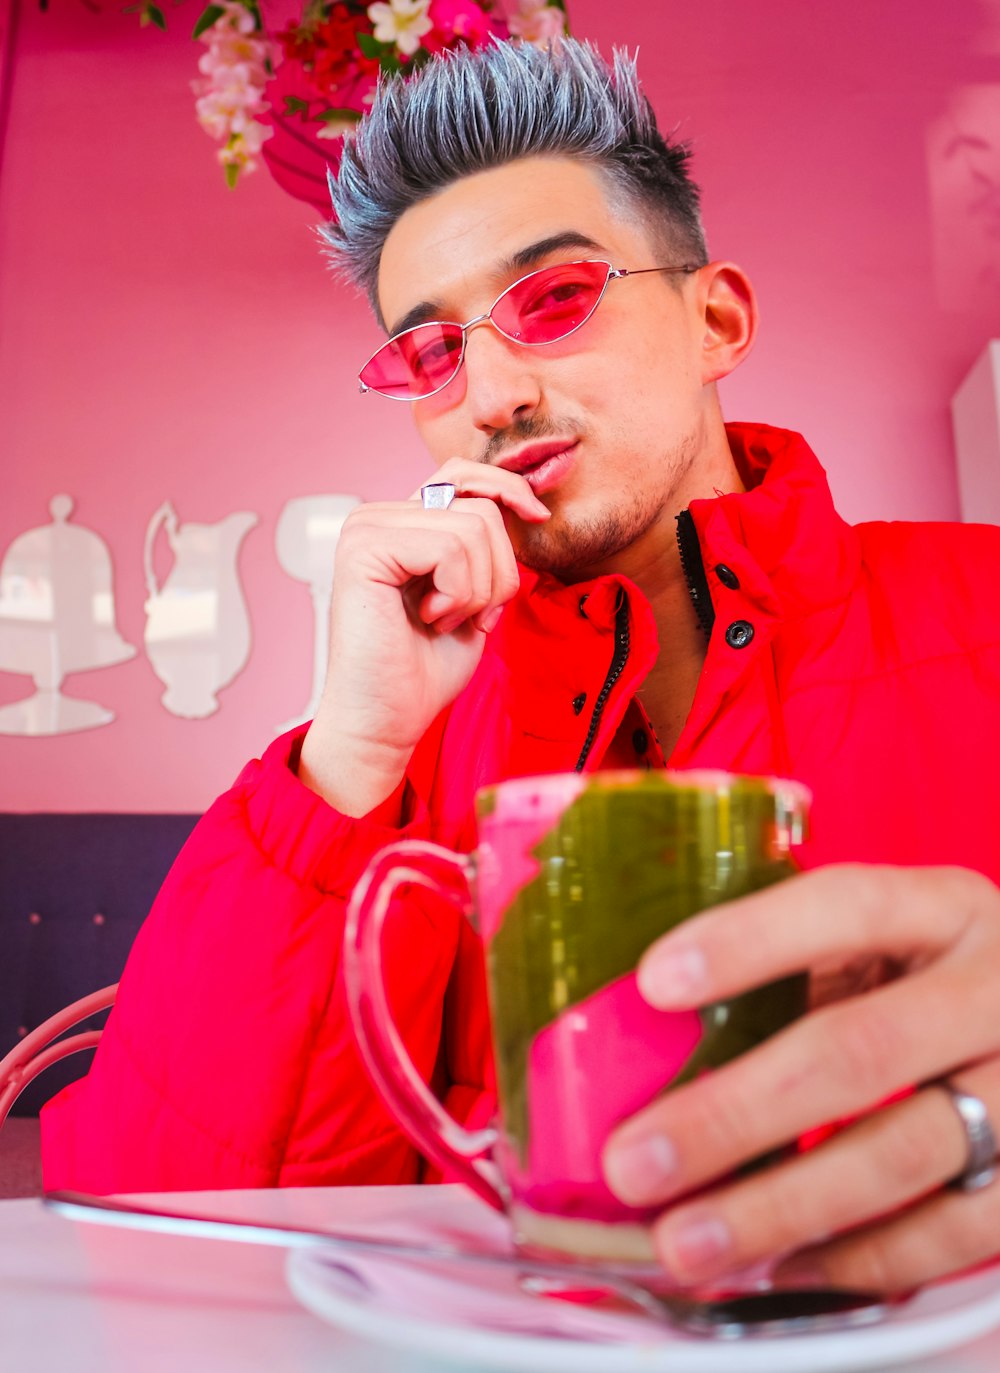 man in red jacket drinking from green glass mug